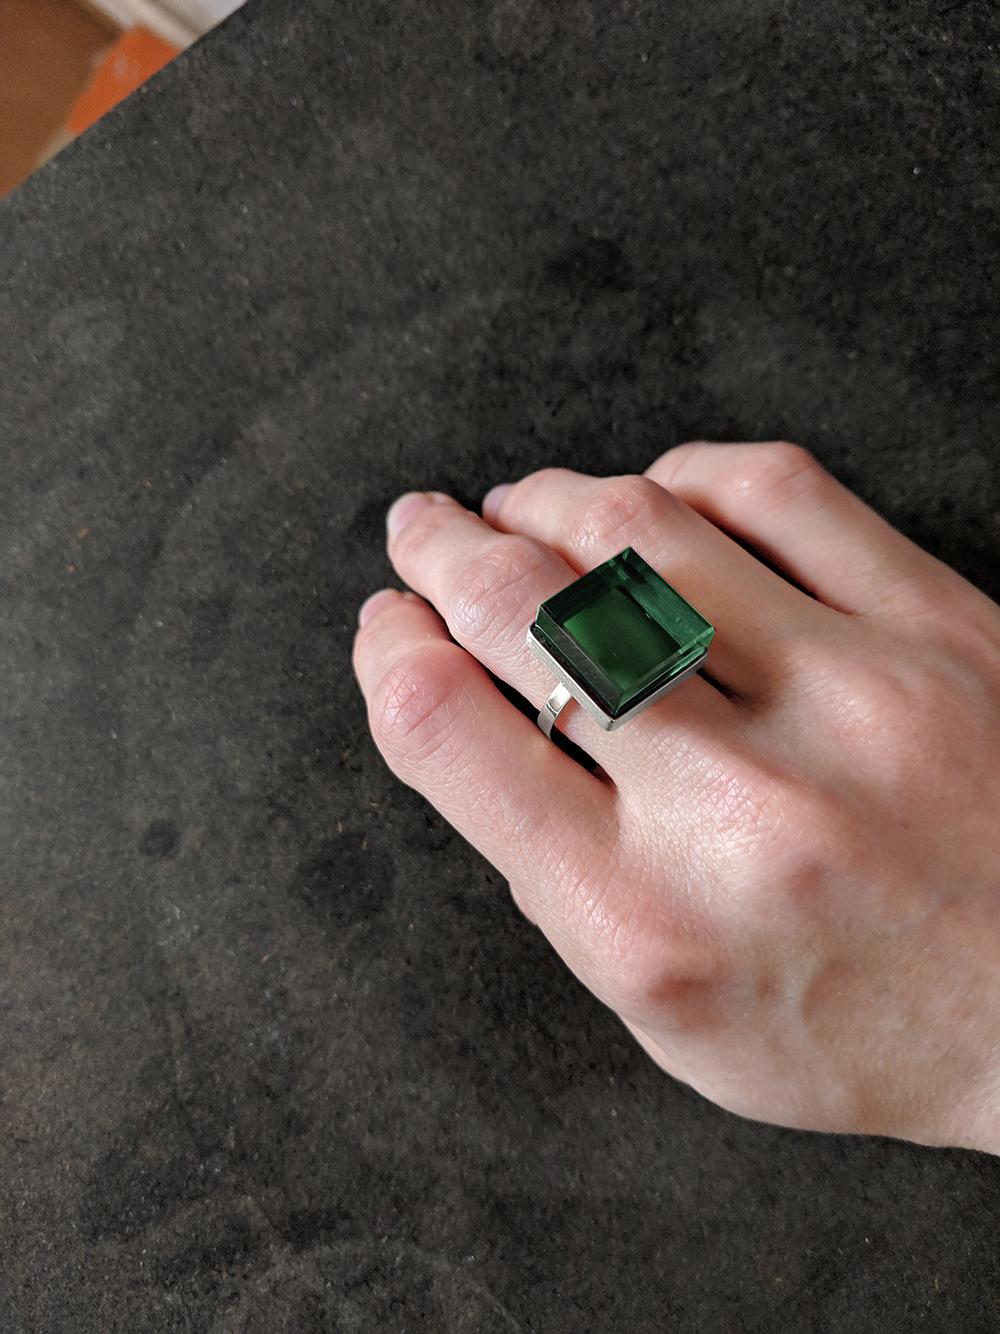 This stunning ring is made of sterling silver and boasts a vibrant 15x15x8 mm grown green quartz. It has been featured in publications such as Harper's Bazaar and Vogue UA.

Inspired by the art deco era, this ring is suitable for both men and women